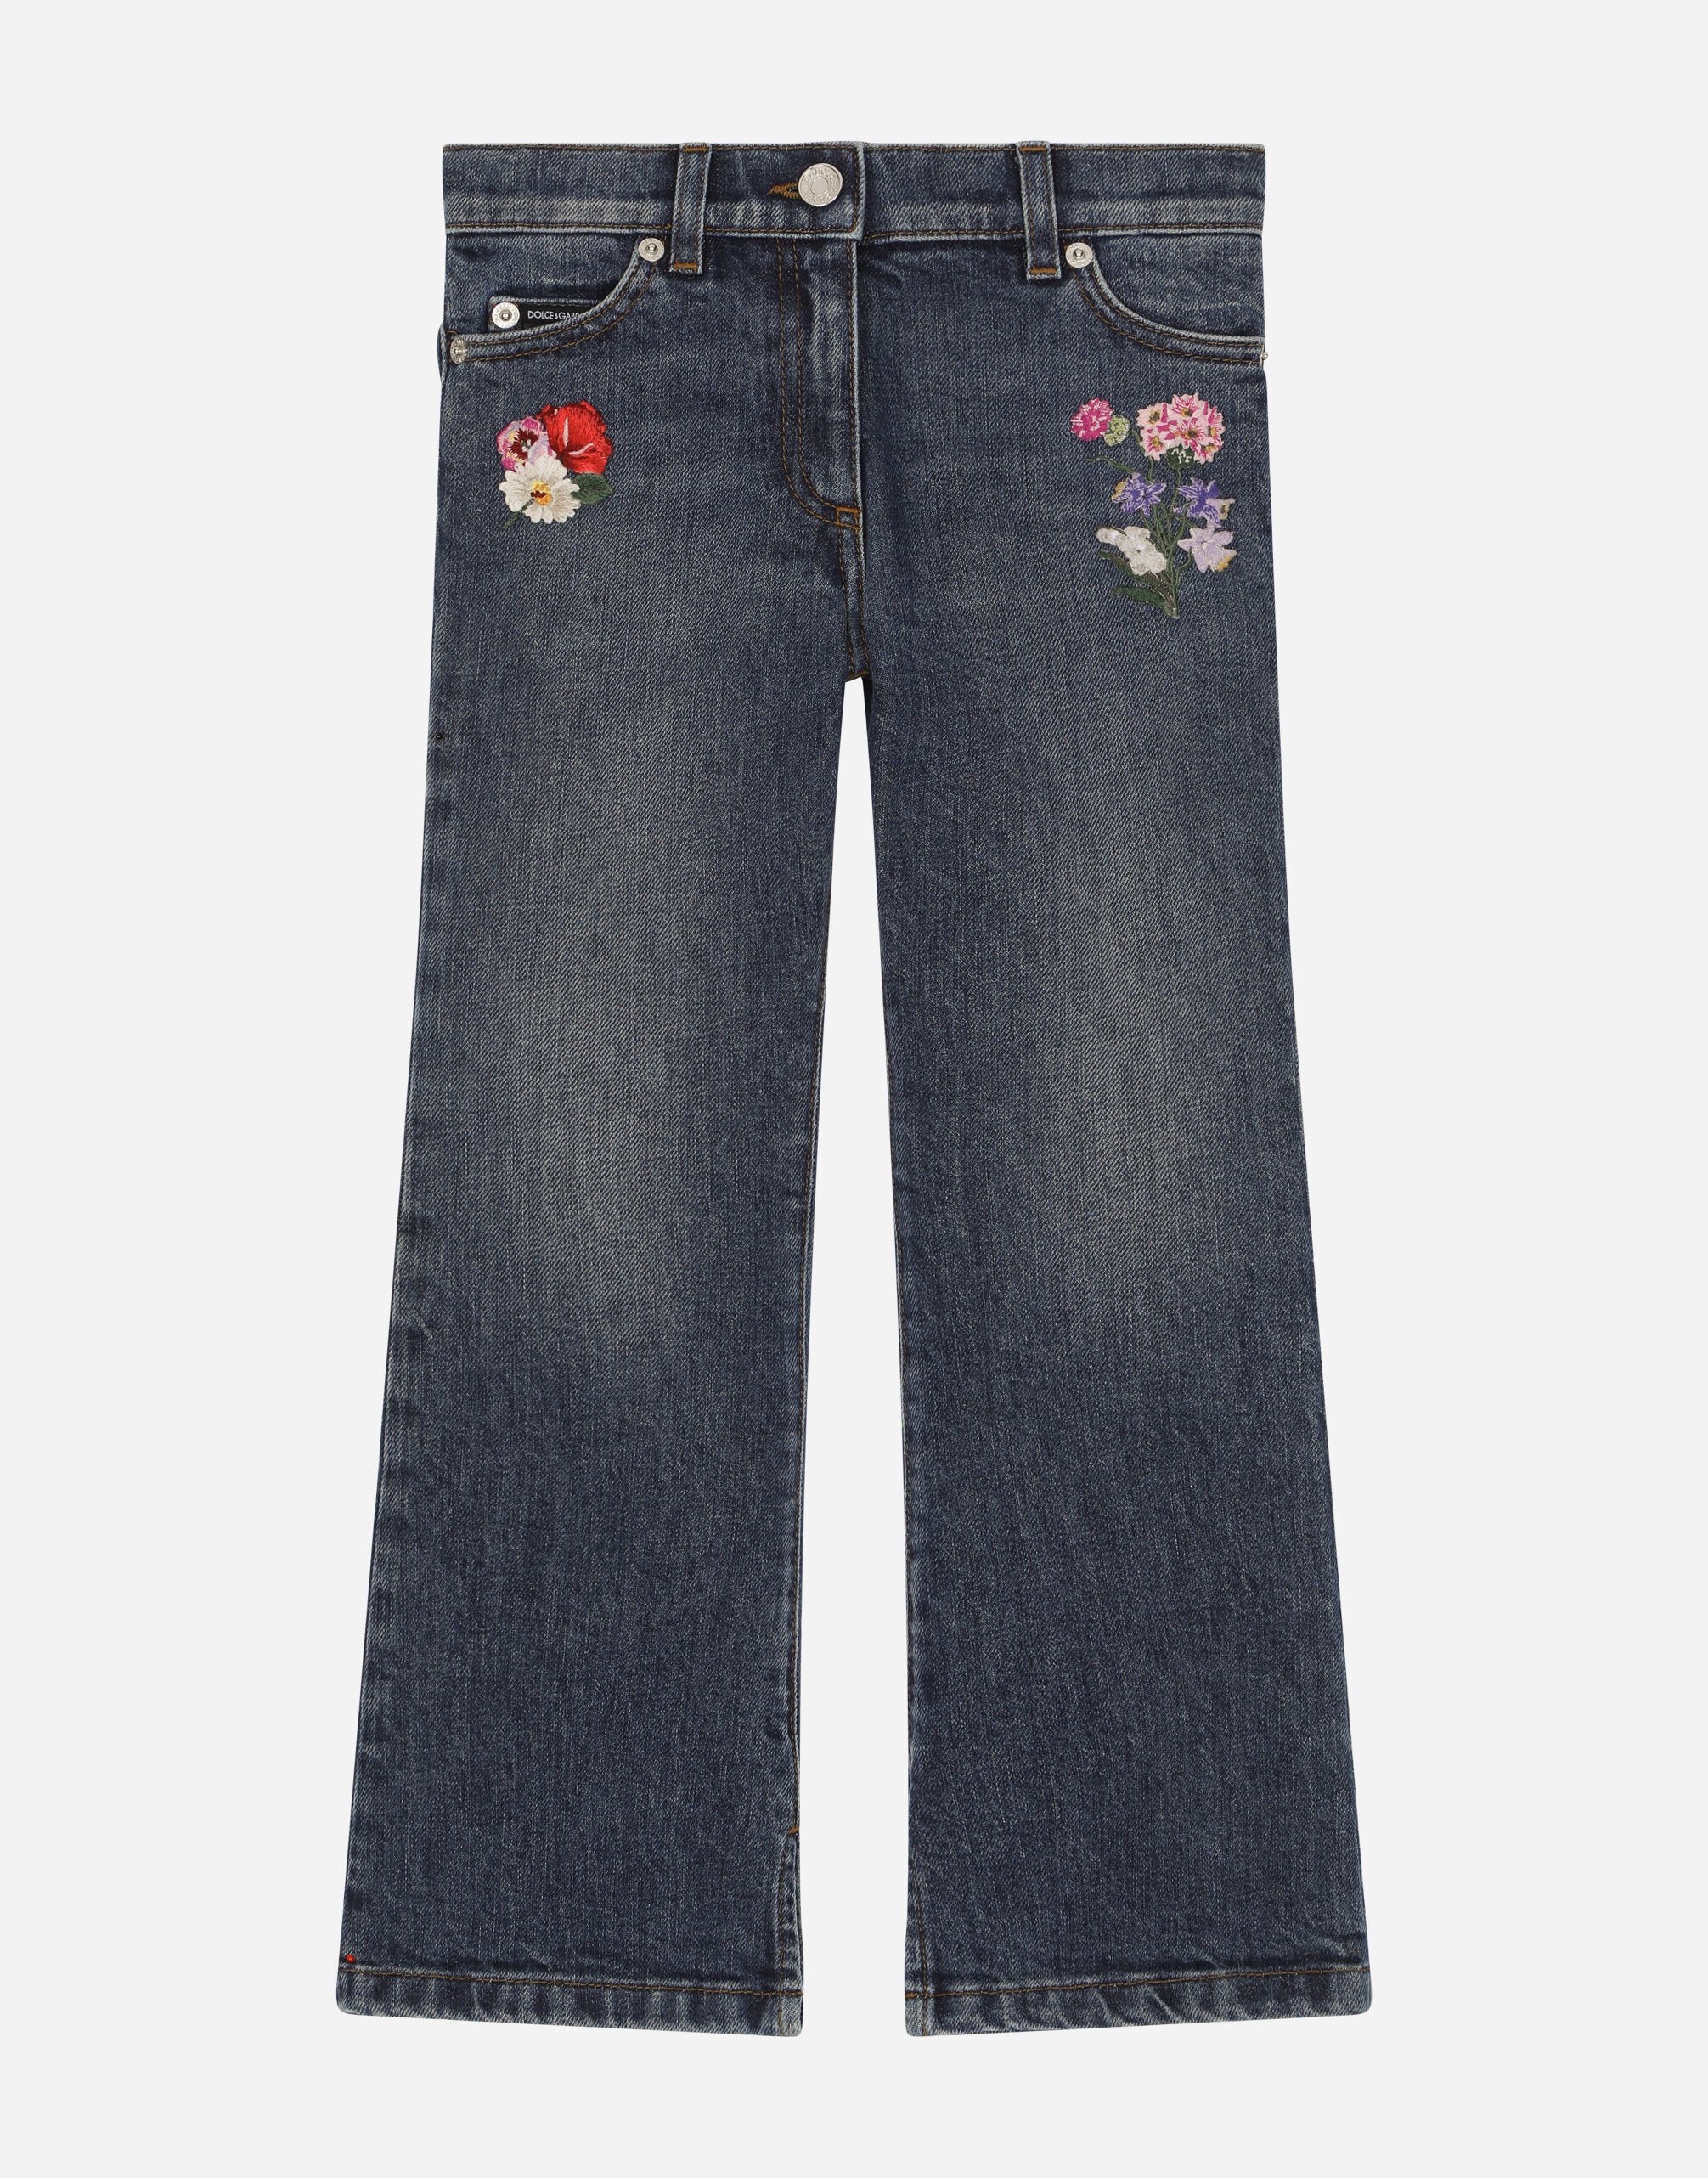 FLOWER EMBROIDERY PANTS